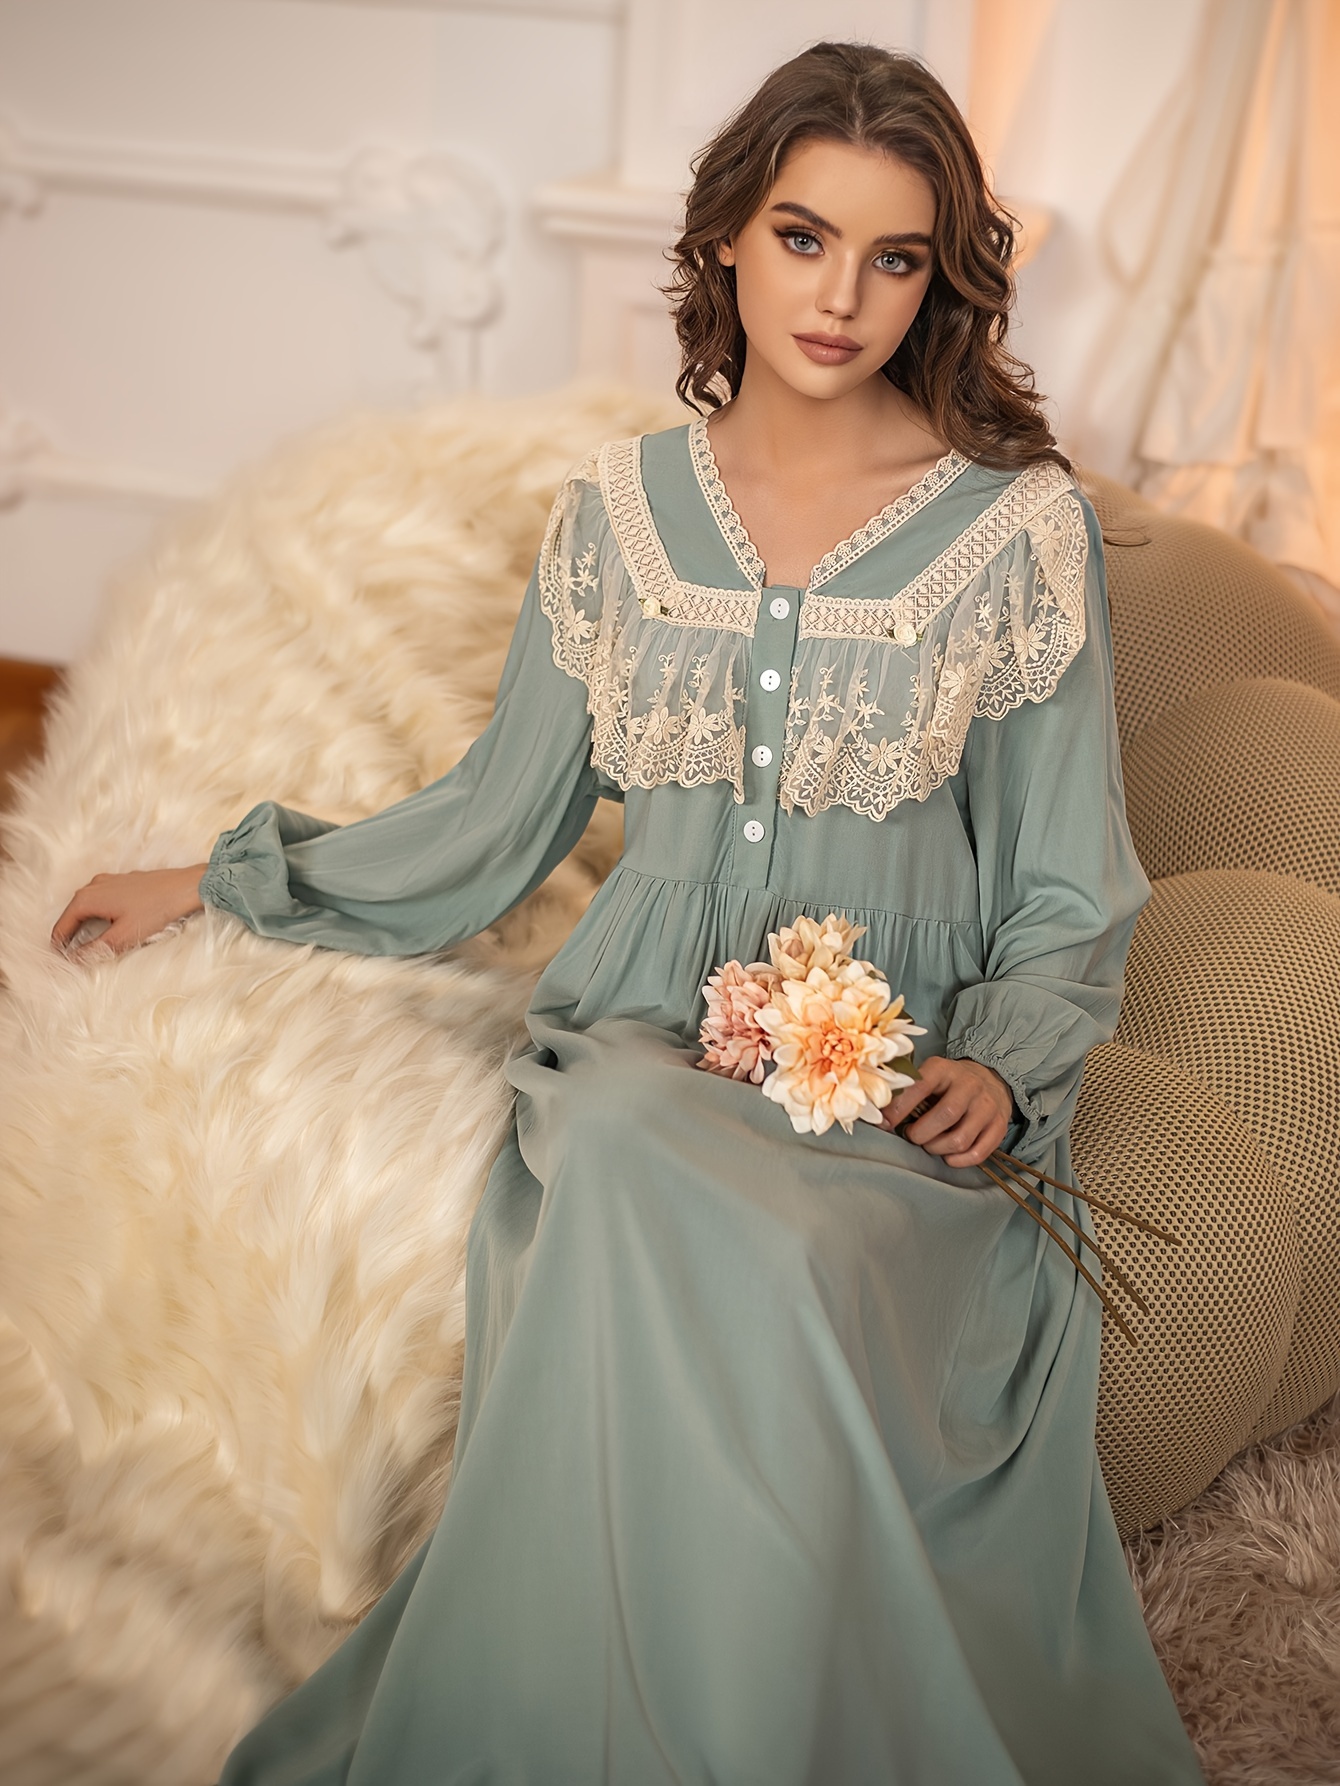 Heritage Long Nightdress with Button Application - Dama de Copas